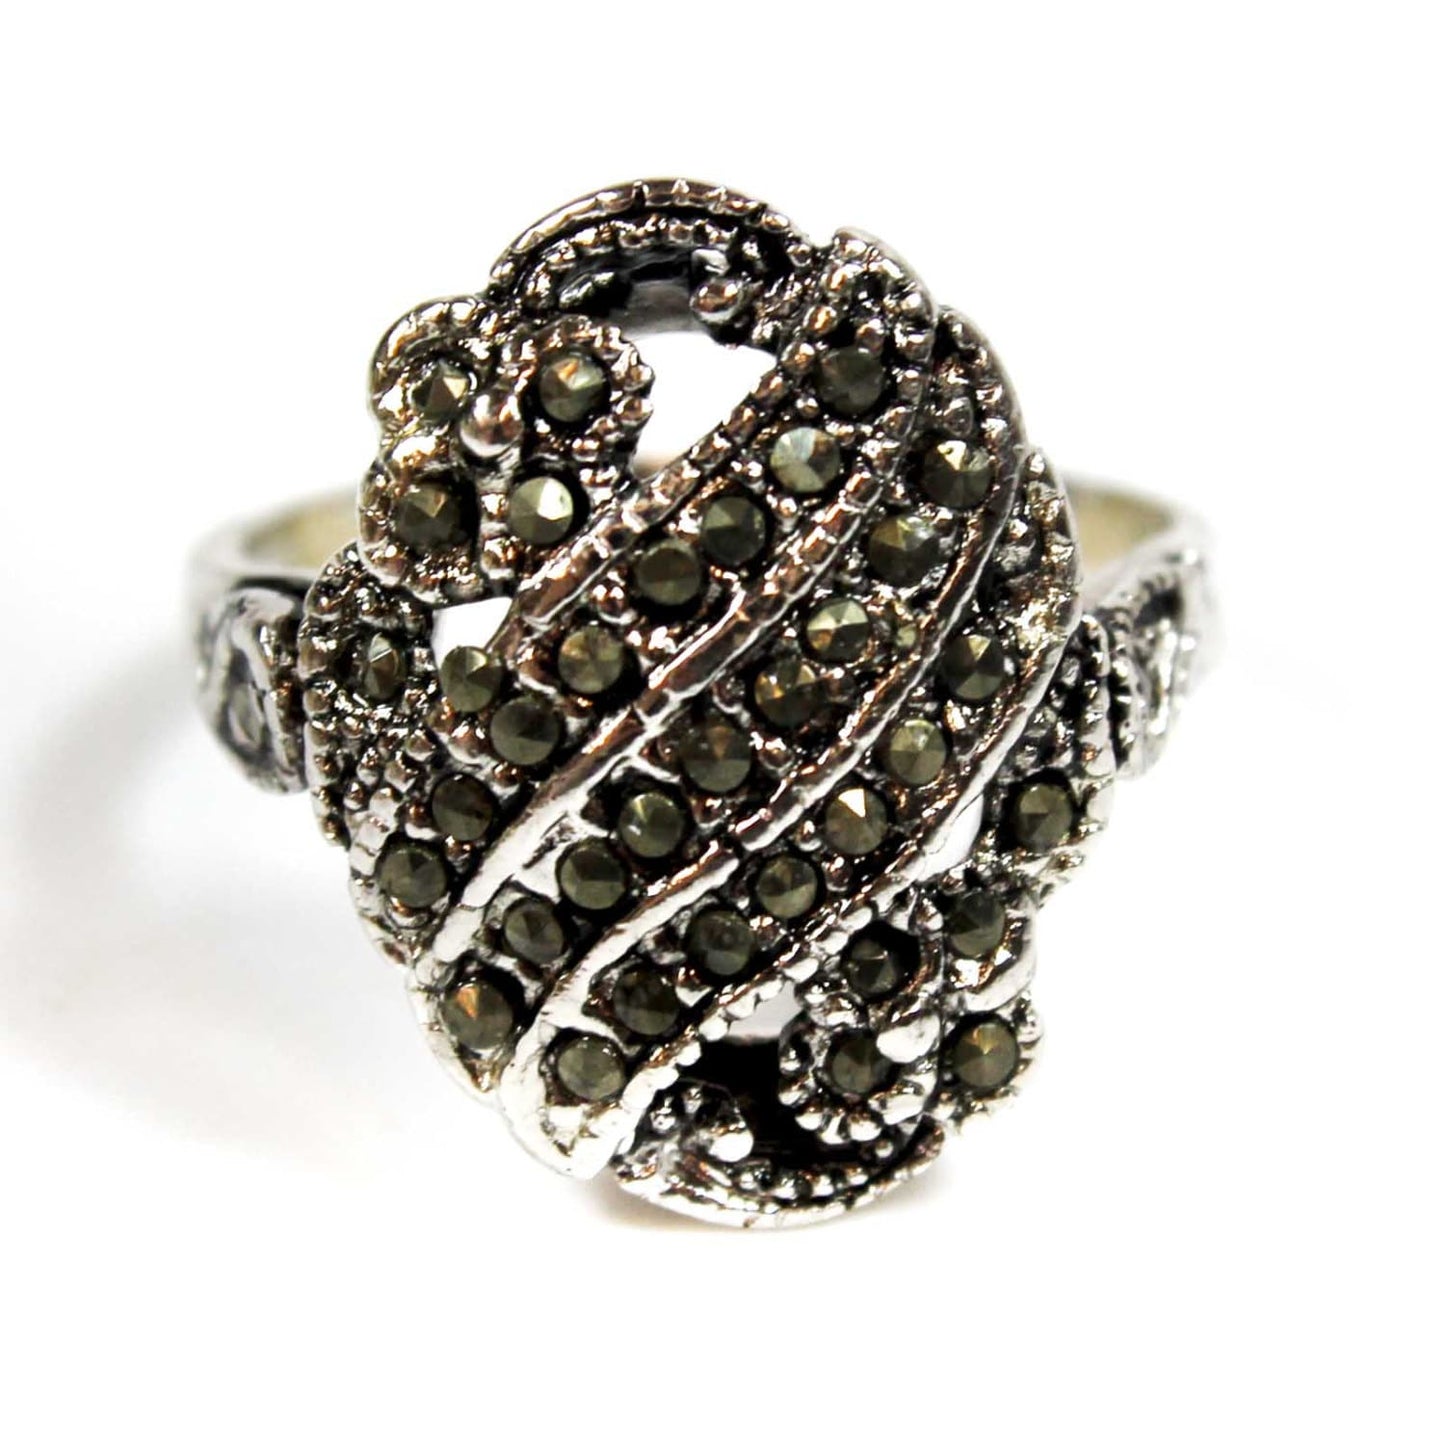 Vintage Ring Unique Genuine Marcasite Ring 18k White Gold Silver #R1413 - Limited Stock - Never Worn